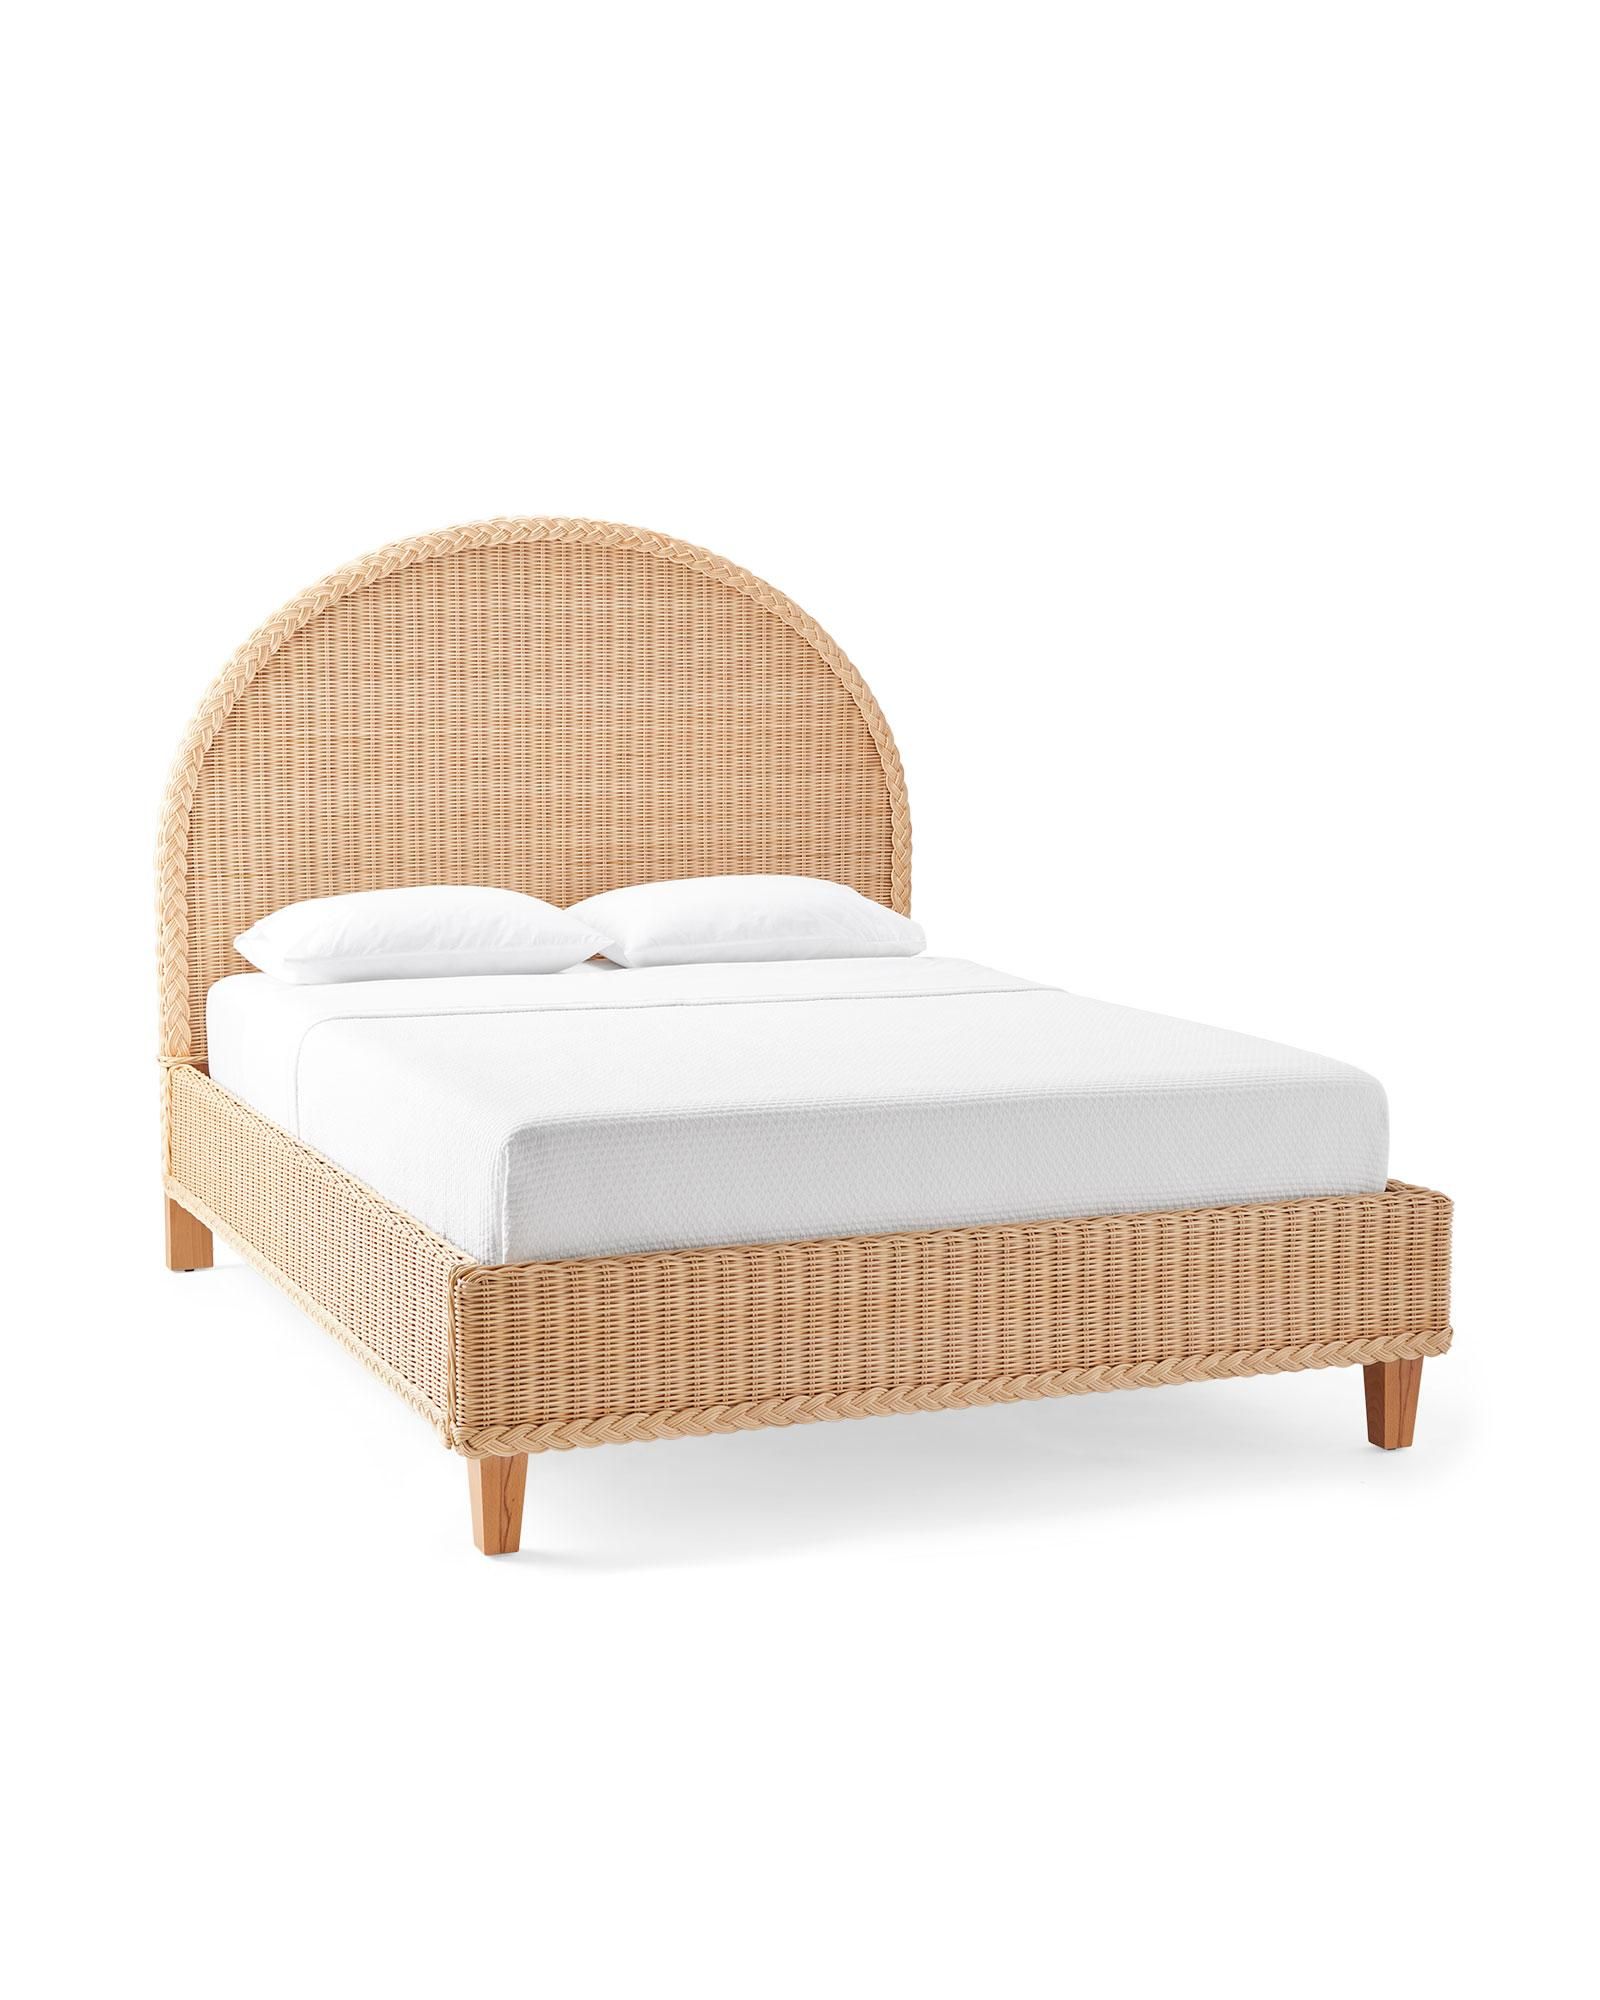 Bungalow Bed | Serena and Lily